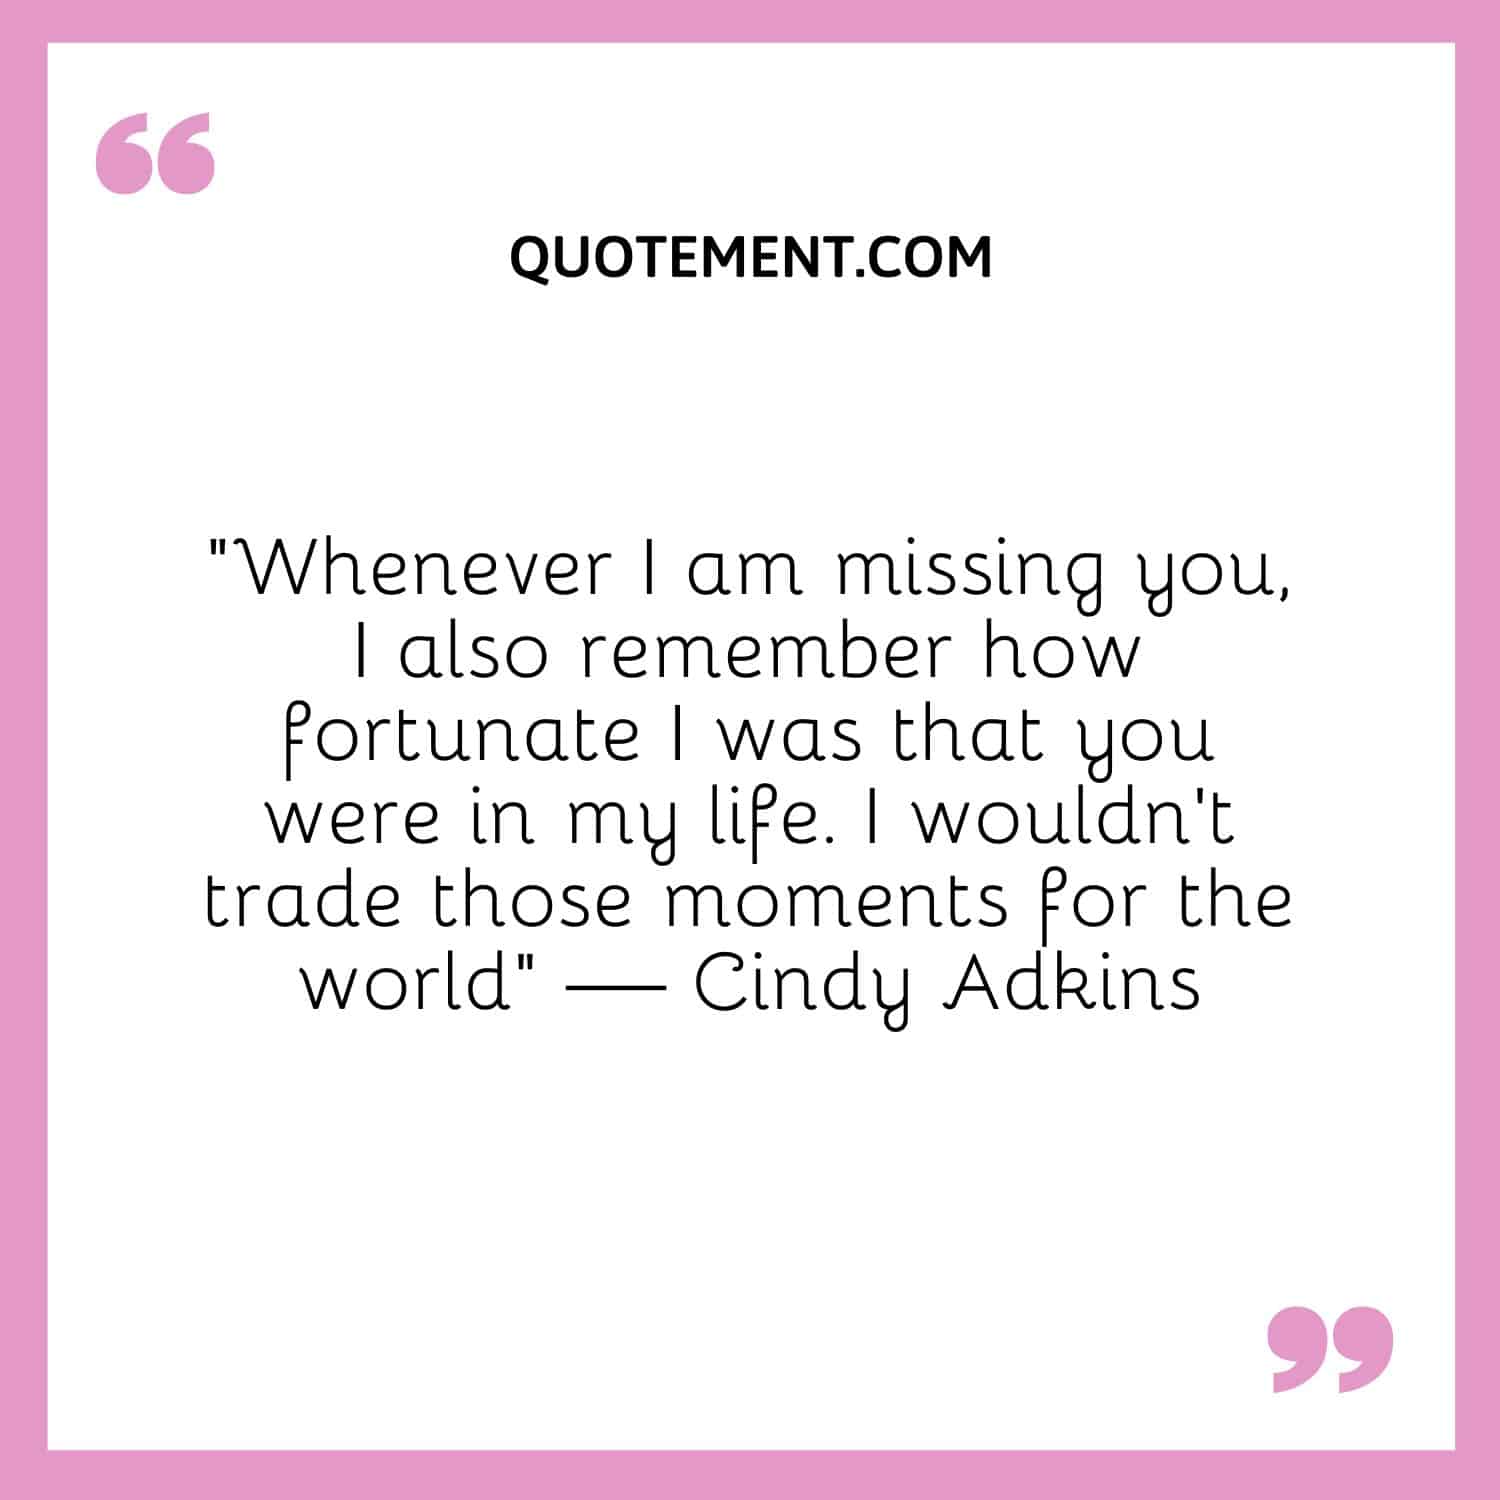 Whenever I am missing you, I also remember how fortunate I was that you were in my life